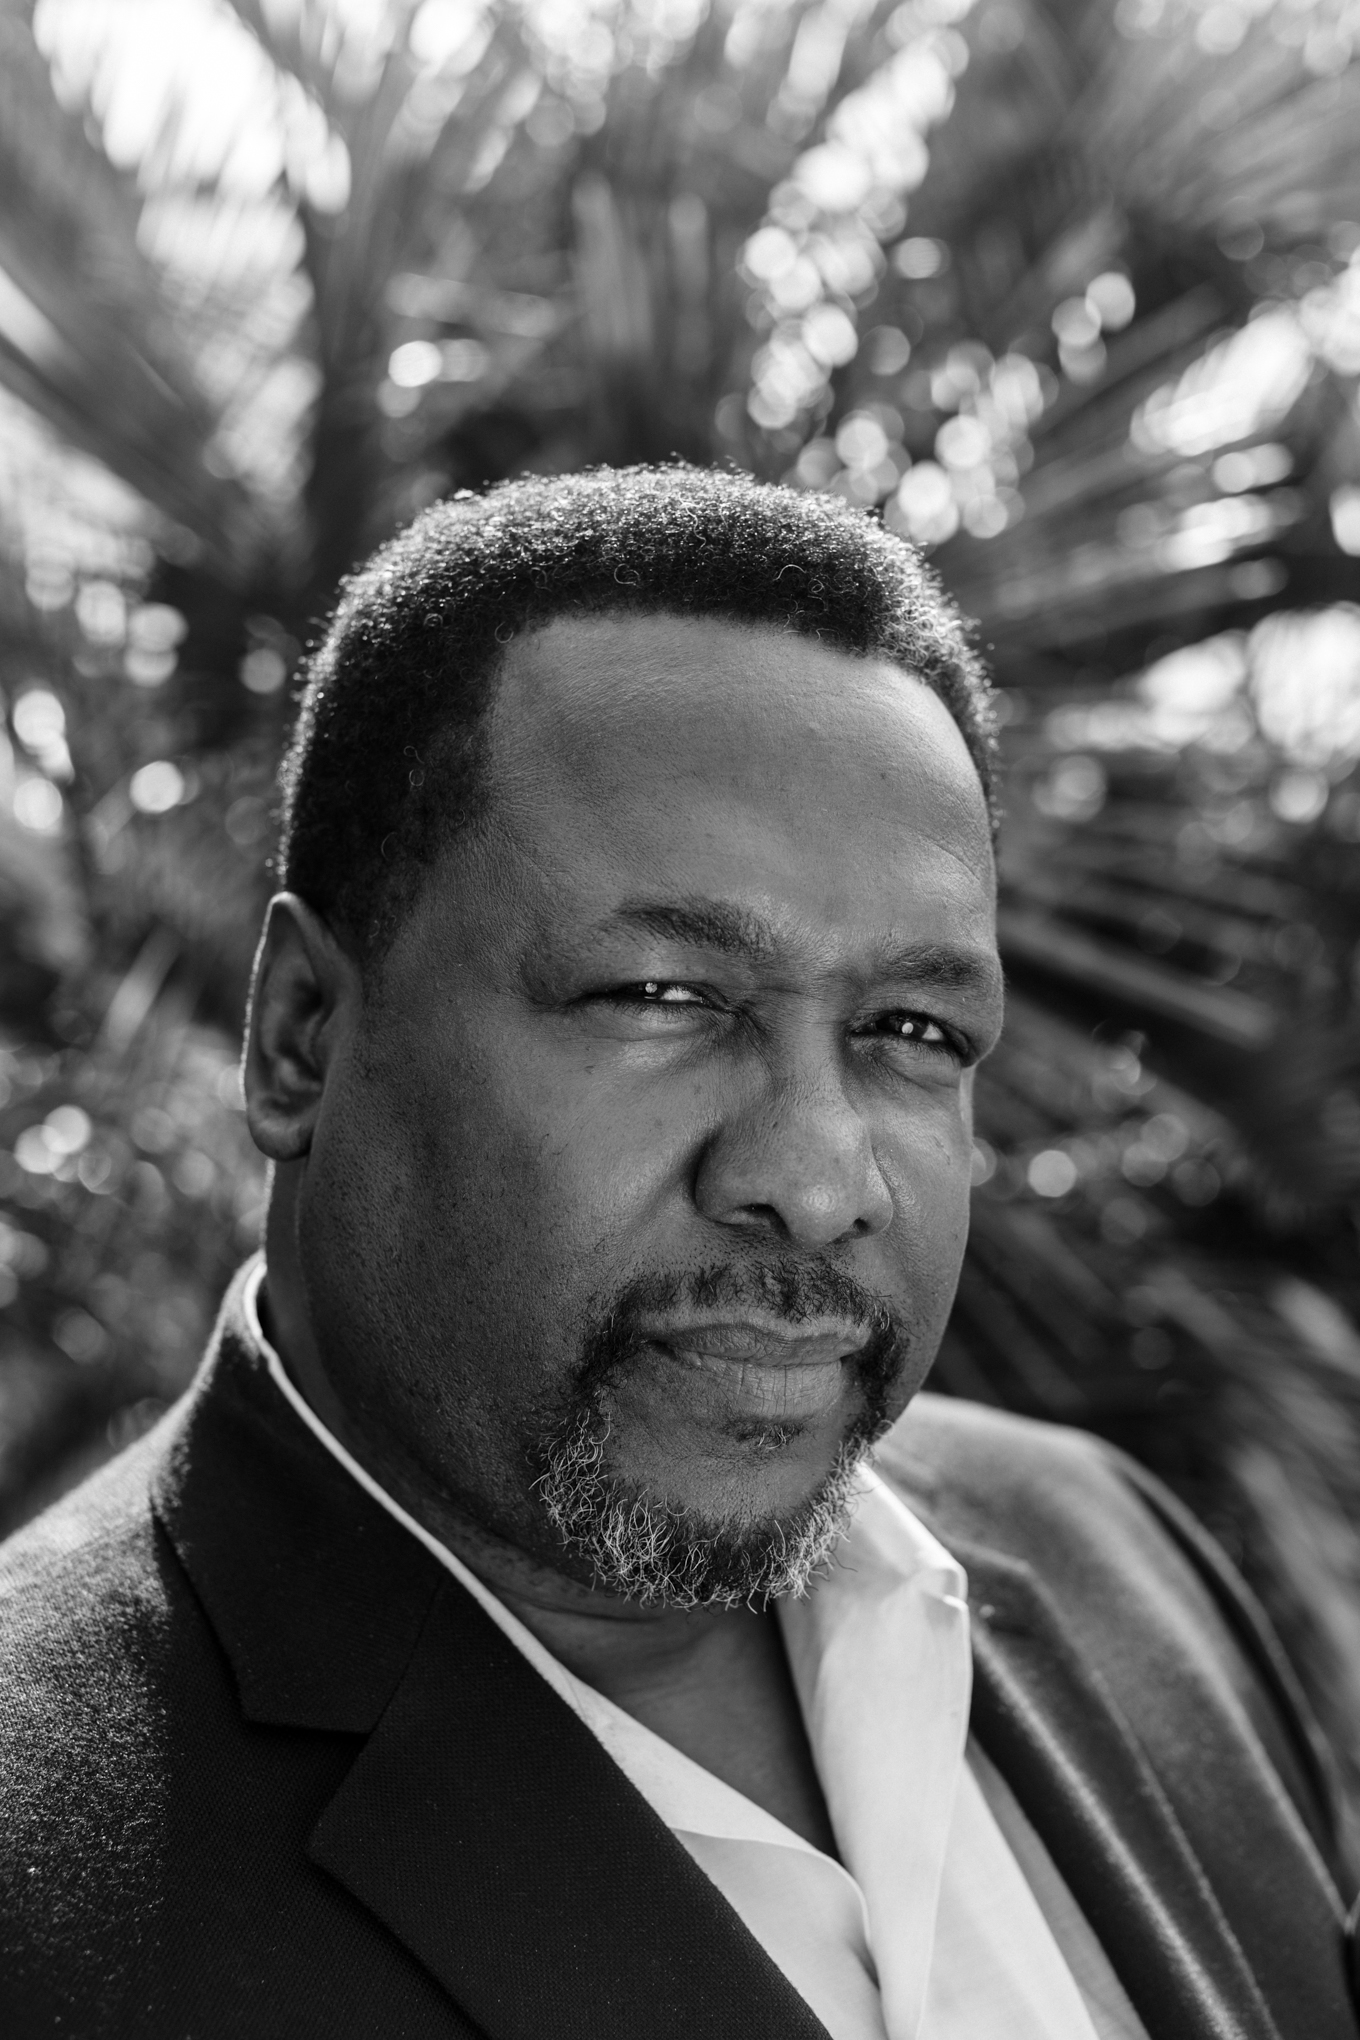  New Orleans, LA - Feb. 7, 2019 - Actor Wendell Pierce photographed at his home in the Pontchartain Park neighborhood of New Orleans. 